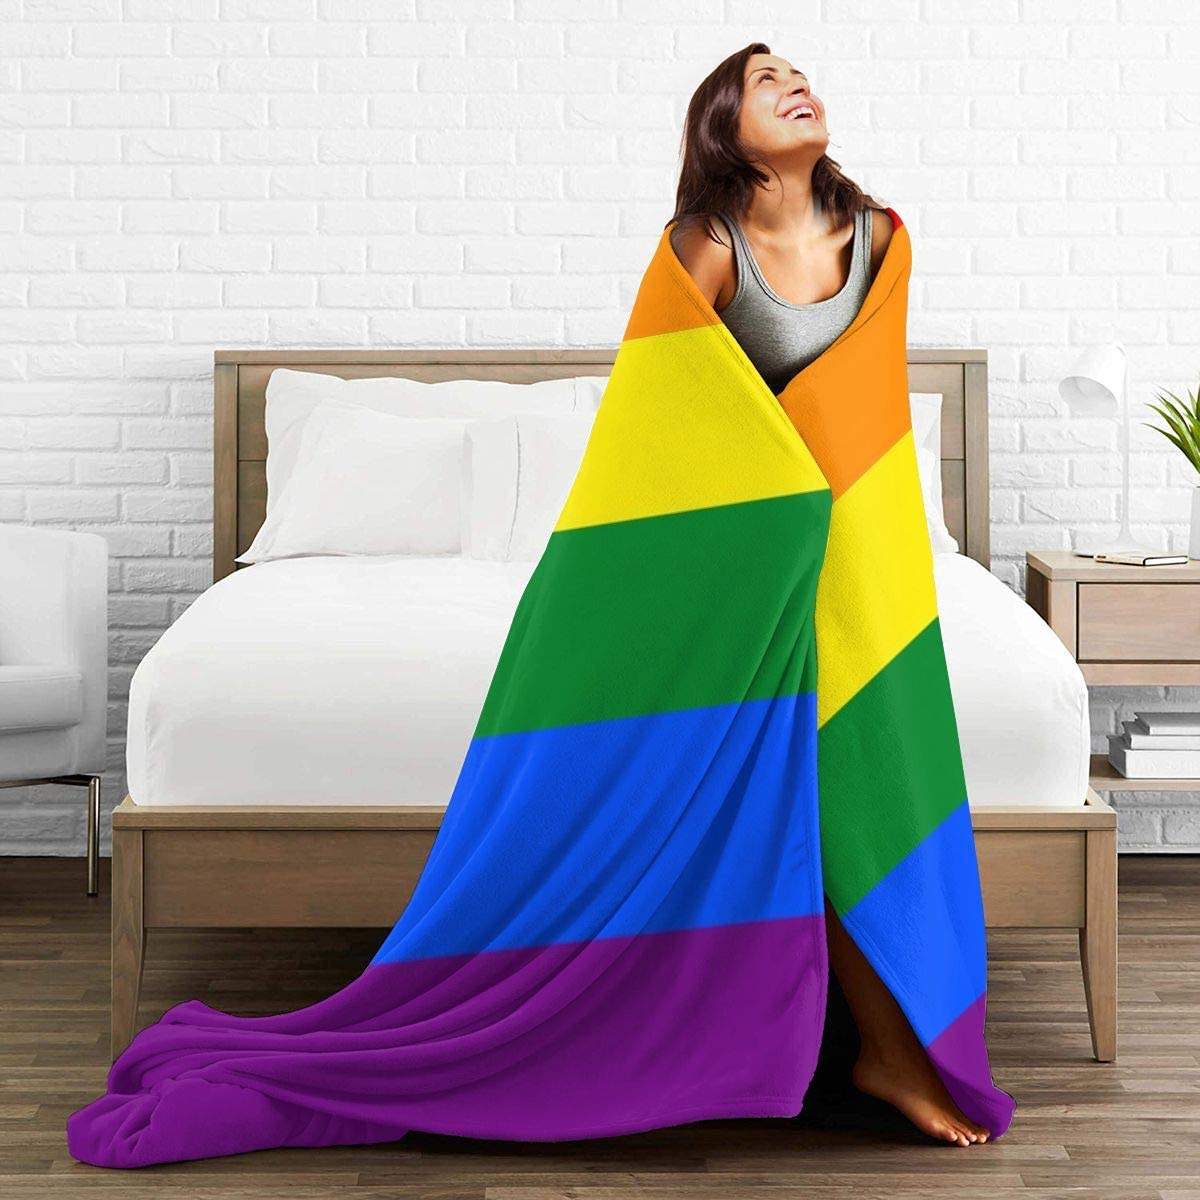 Flannel Blanket Lgbt Rainbow Flag Lightweight Cozy Bed Blanket Soft Throw Blanket Fits Couch Sofa For Pride Month